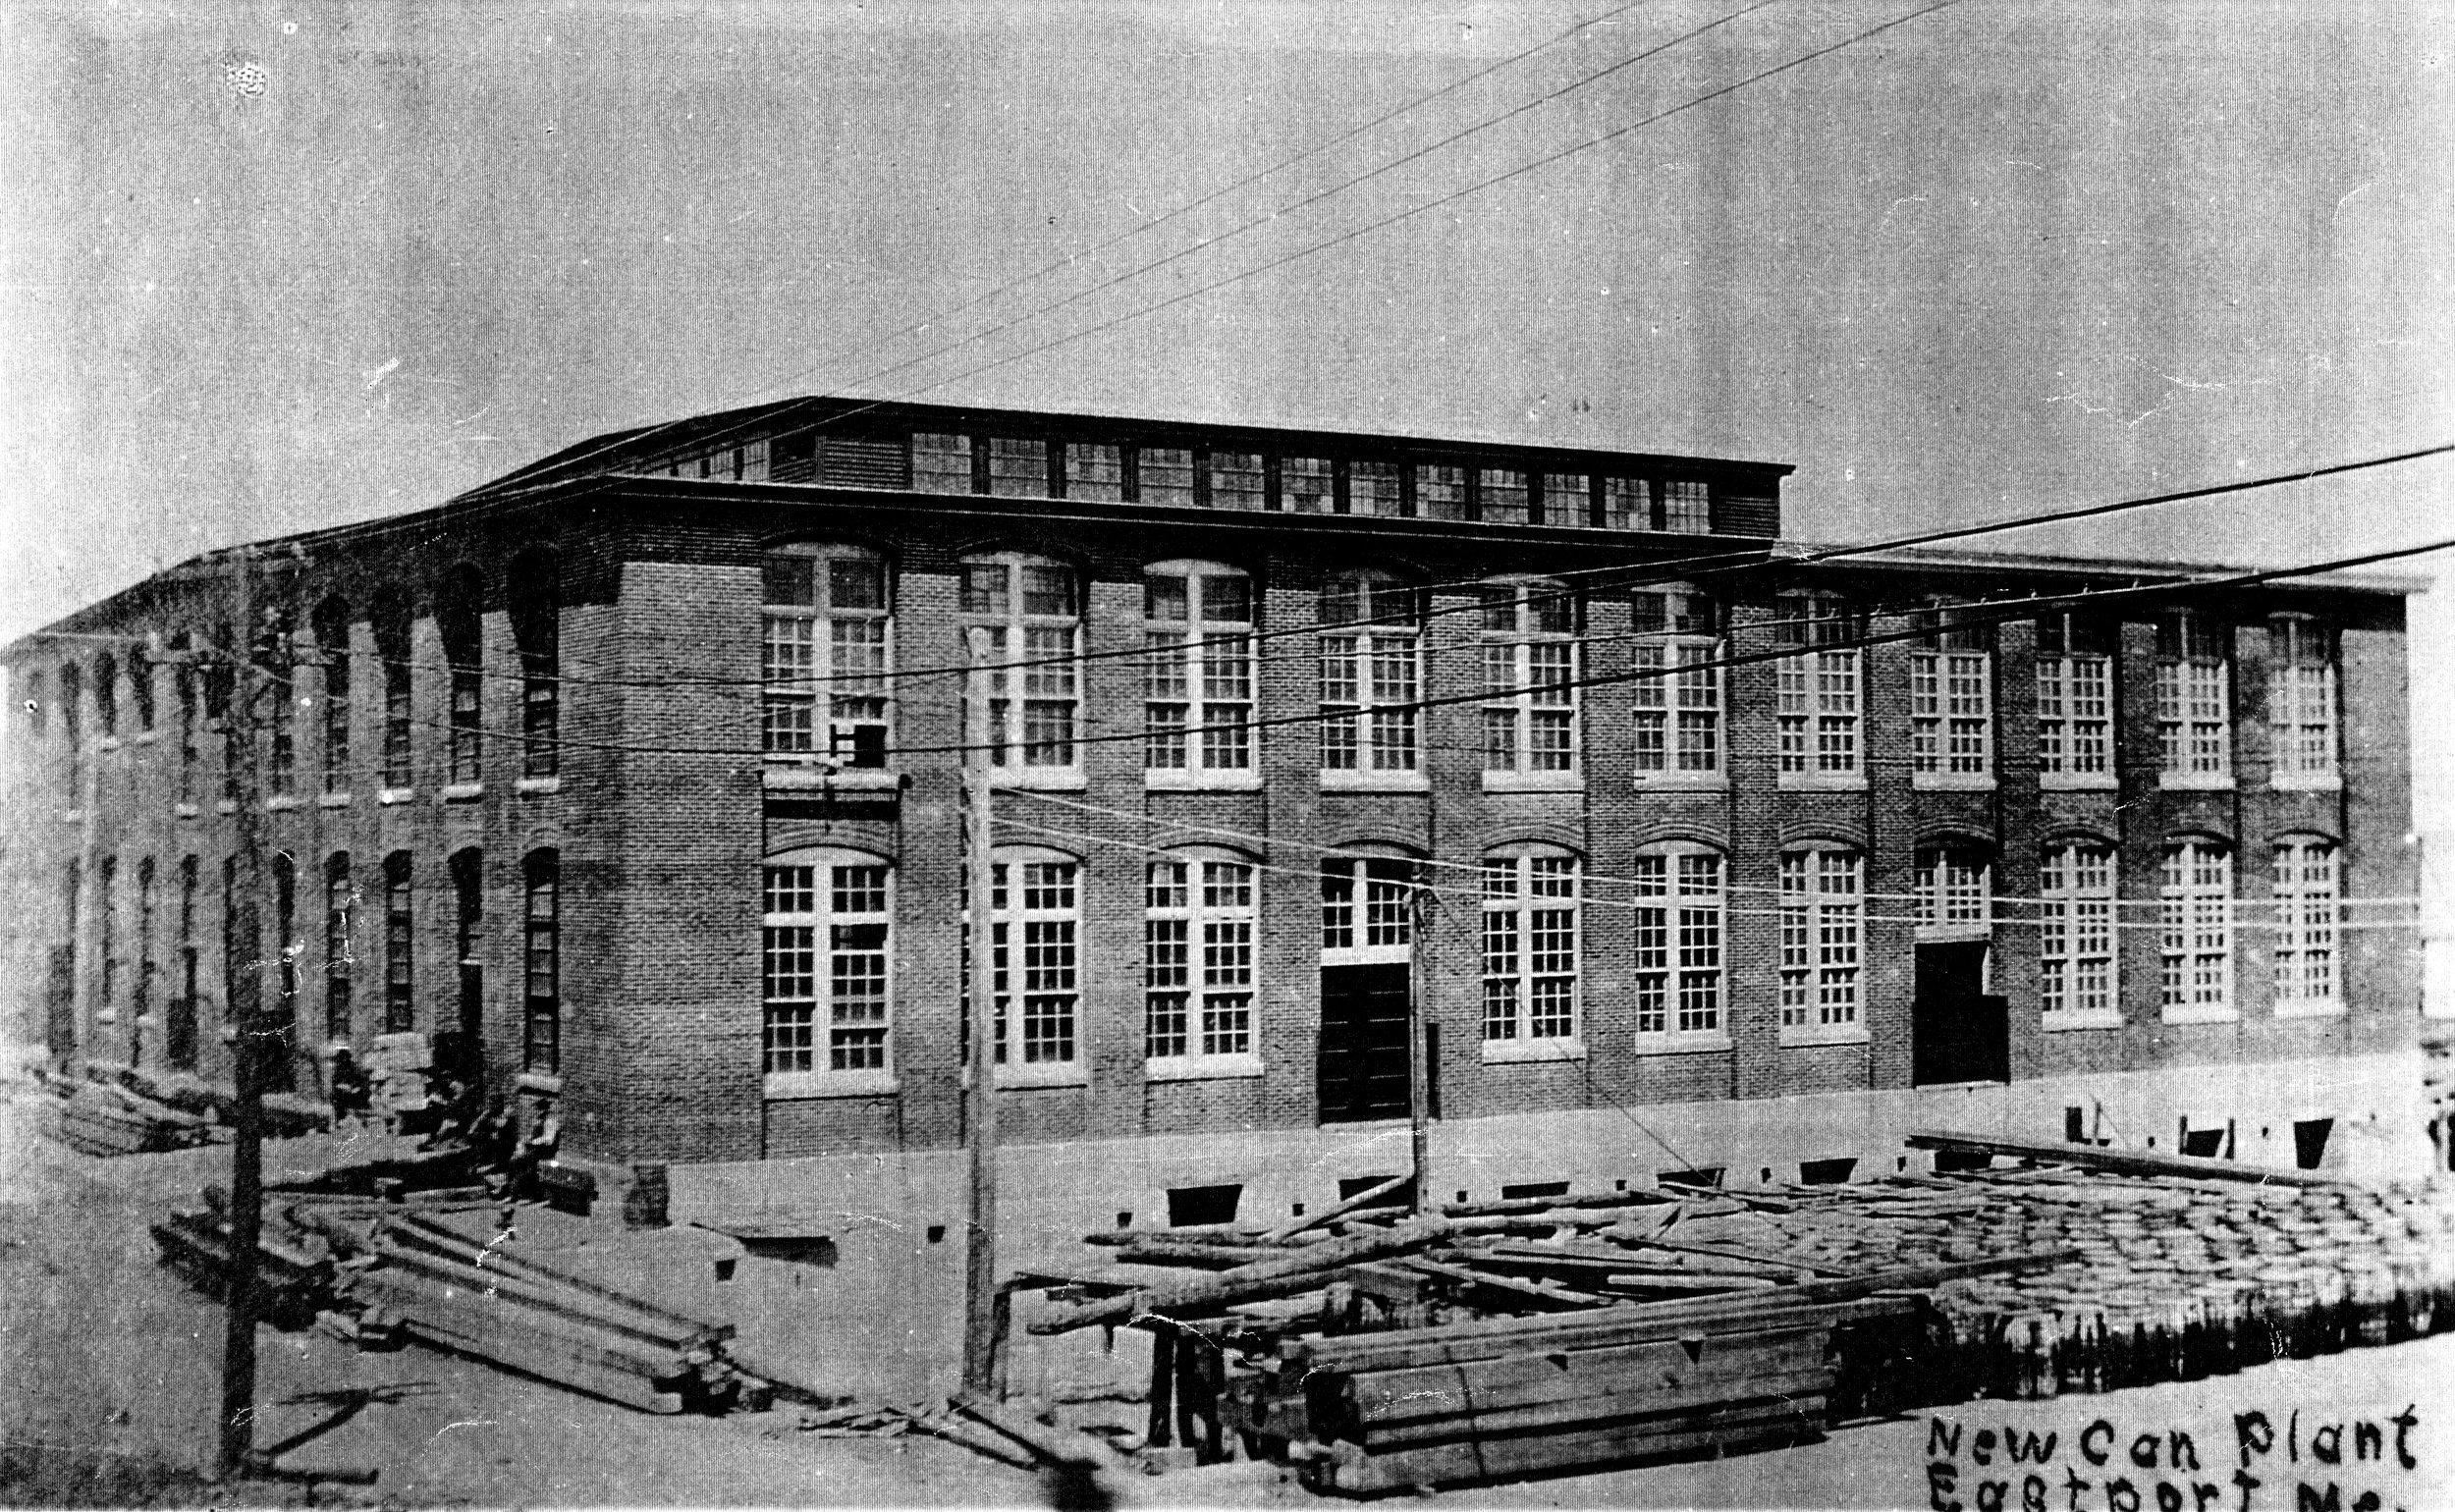 American Can Company Building under construction in 1908, image courtesy of Dirigamus, LLC